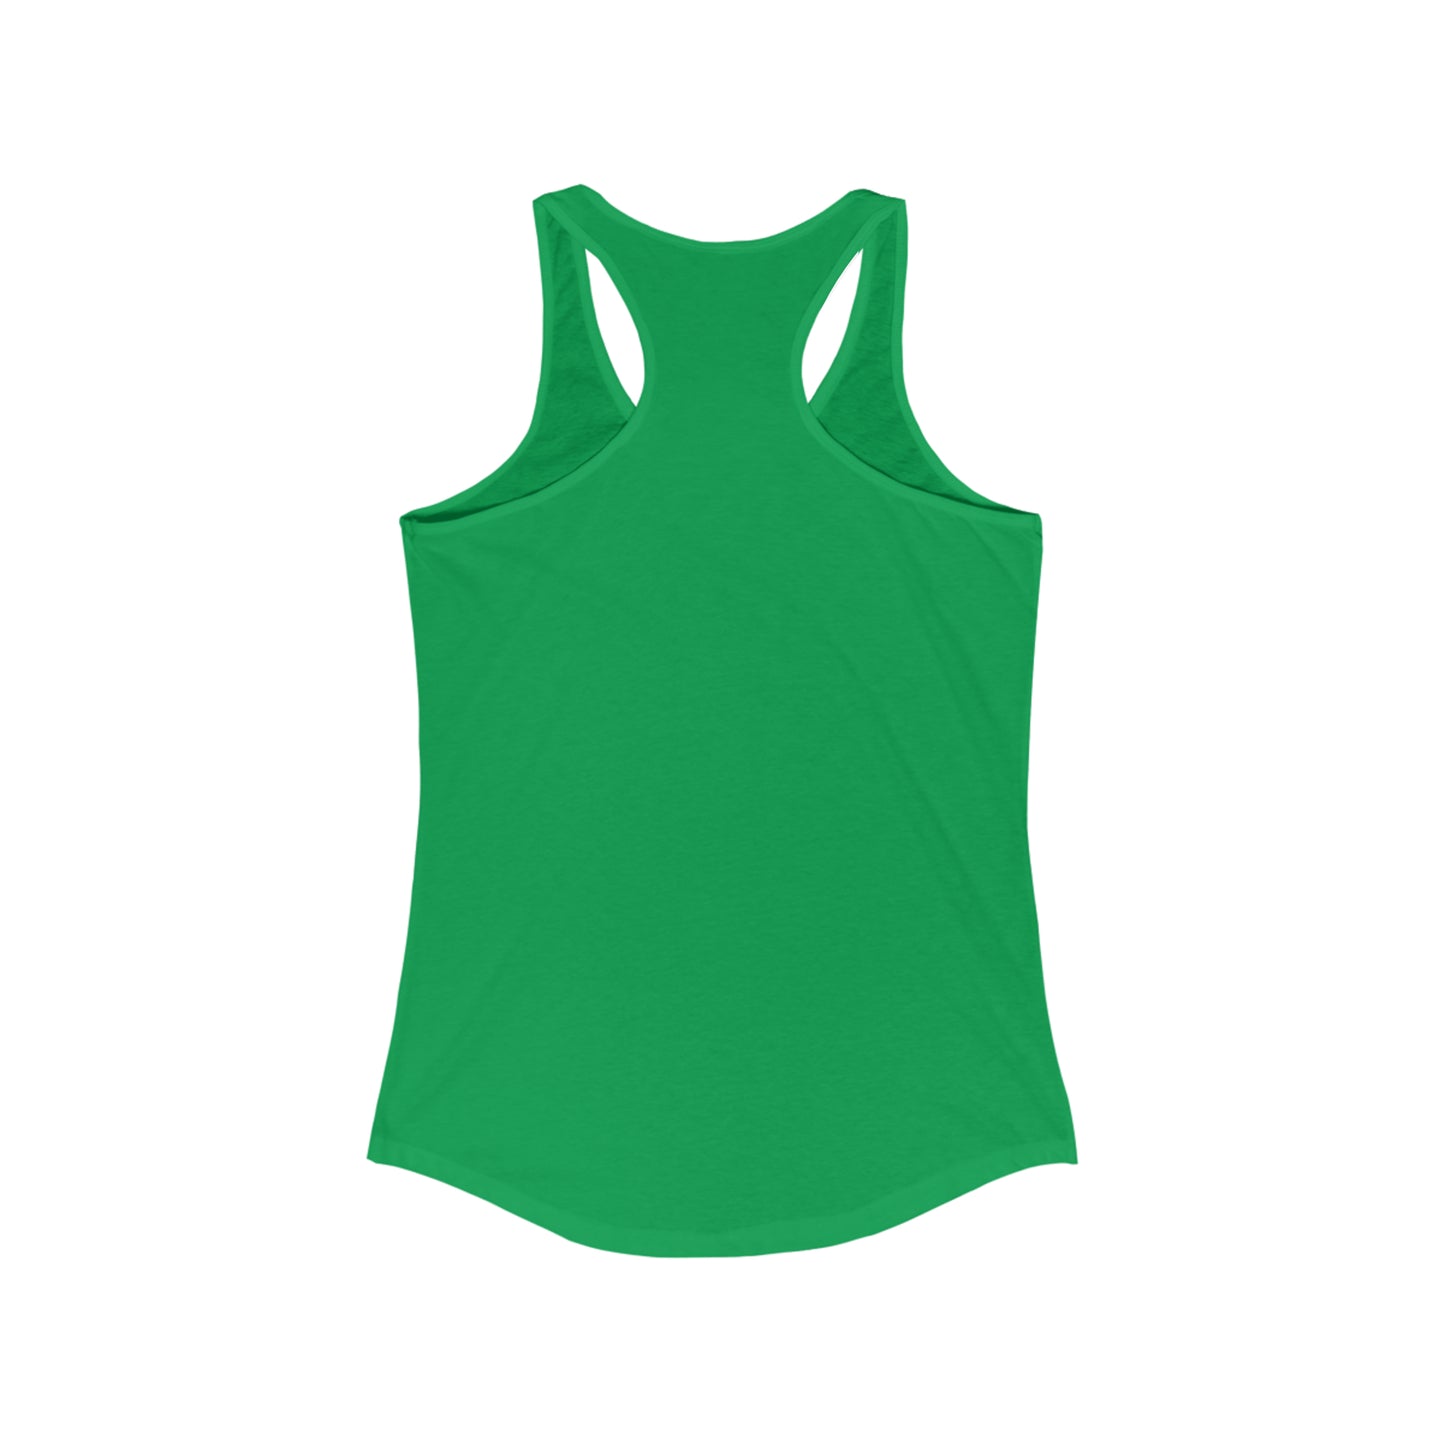 Tested and tried slim fit tank-top